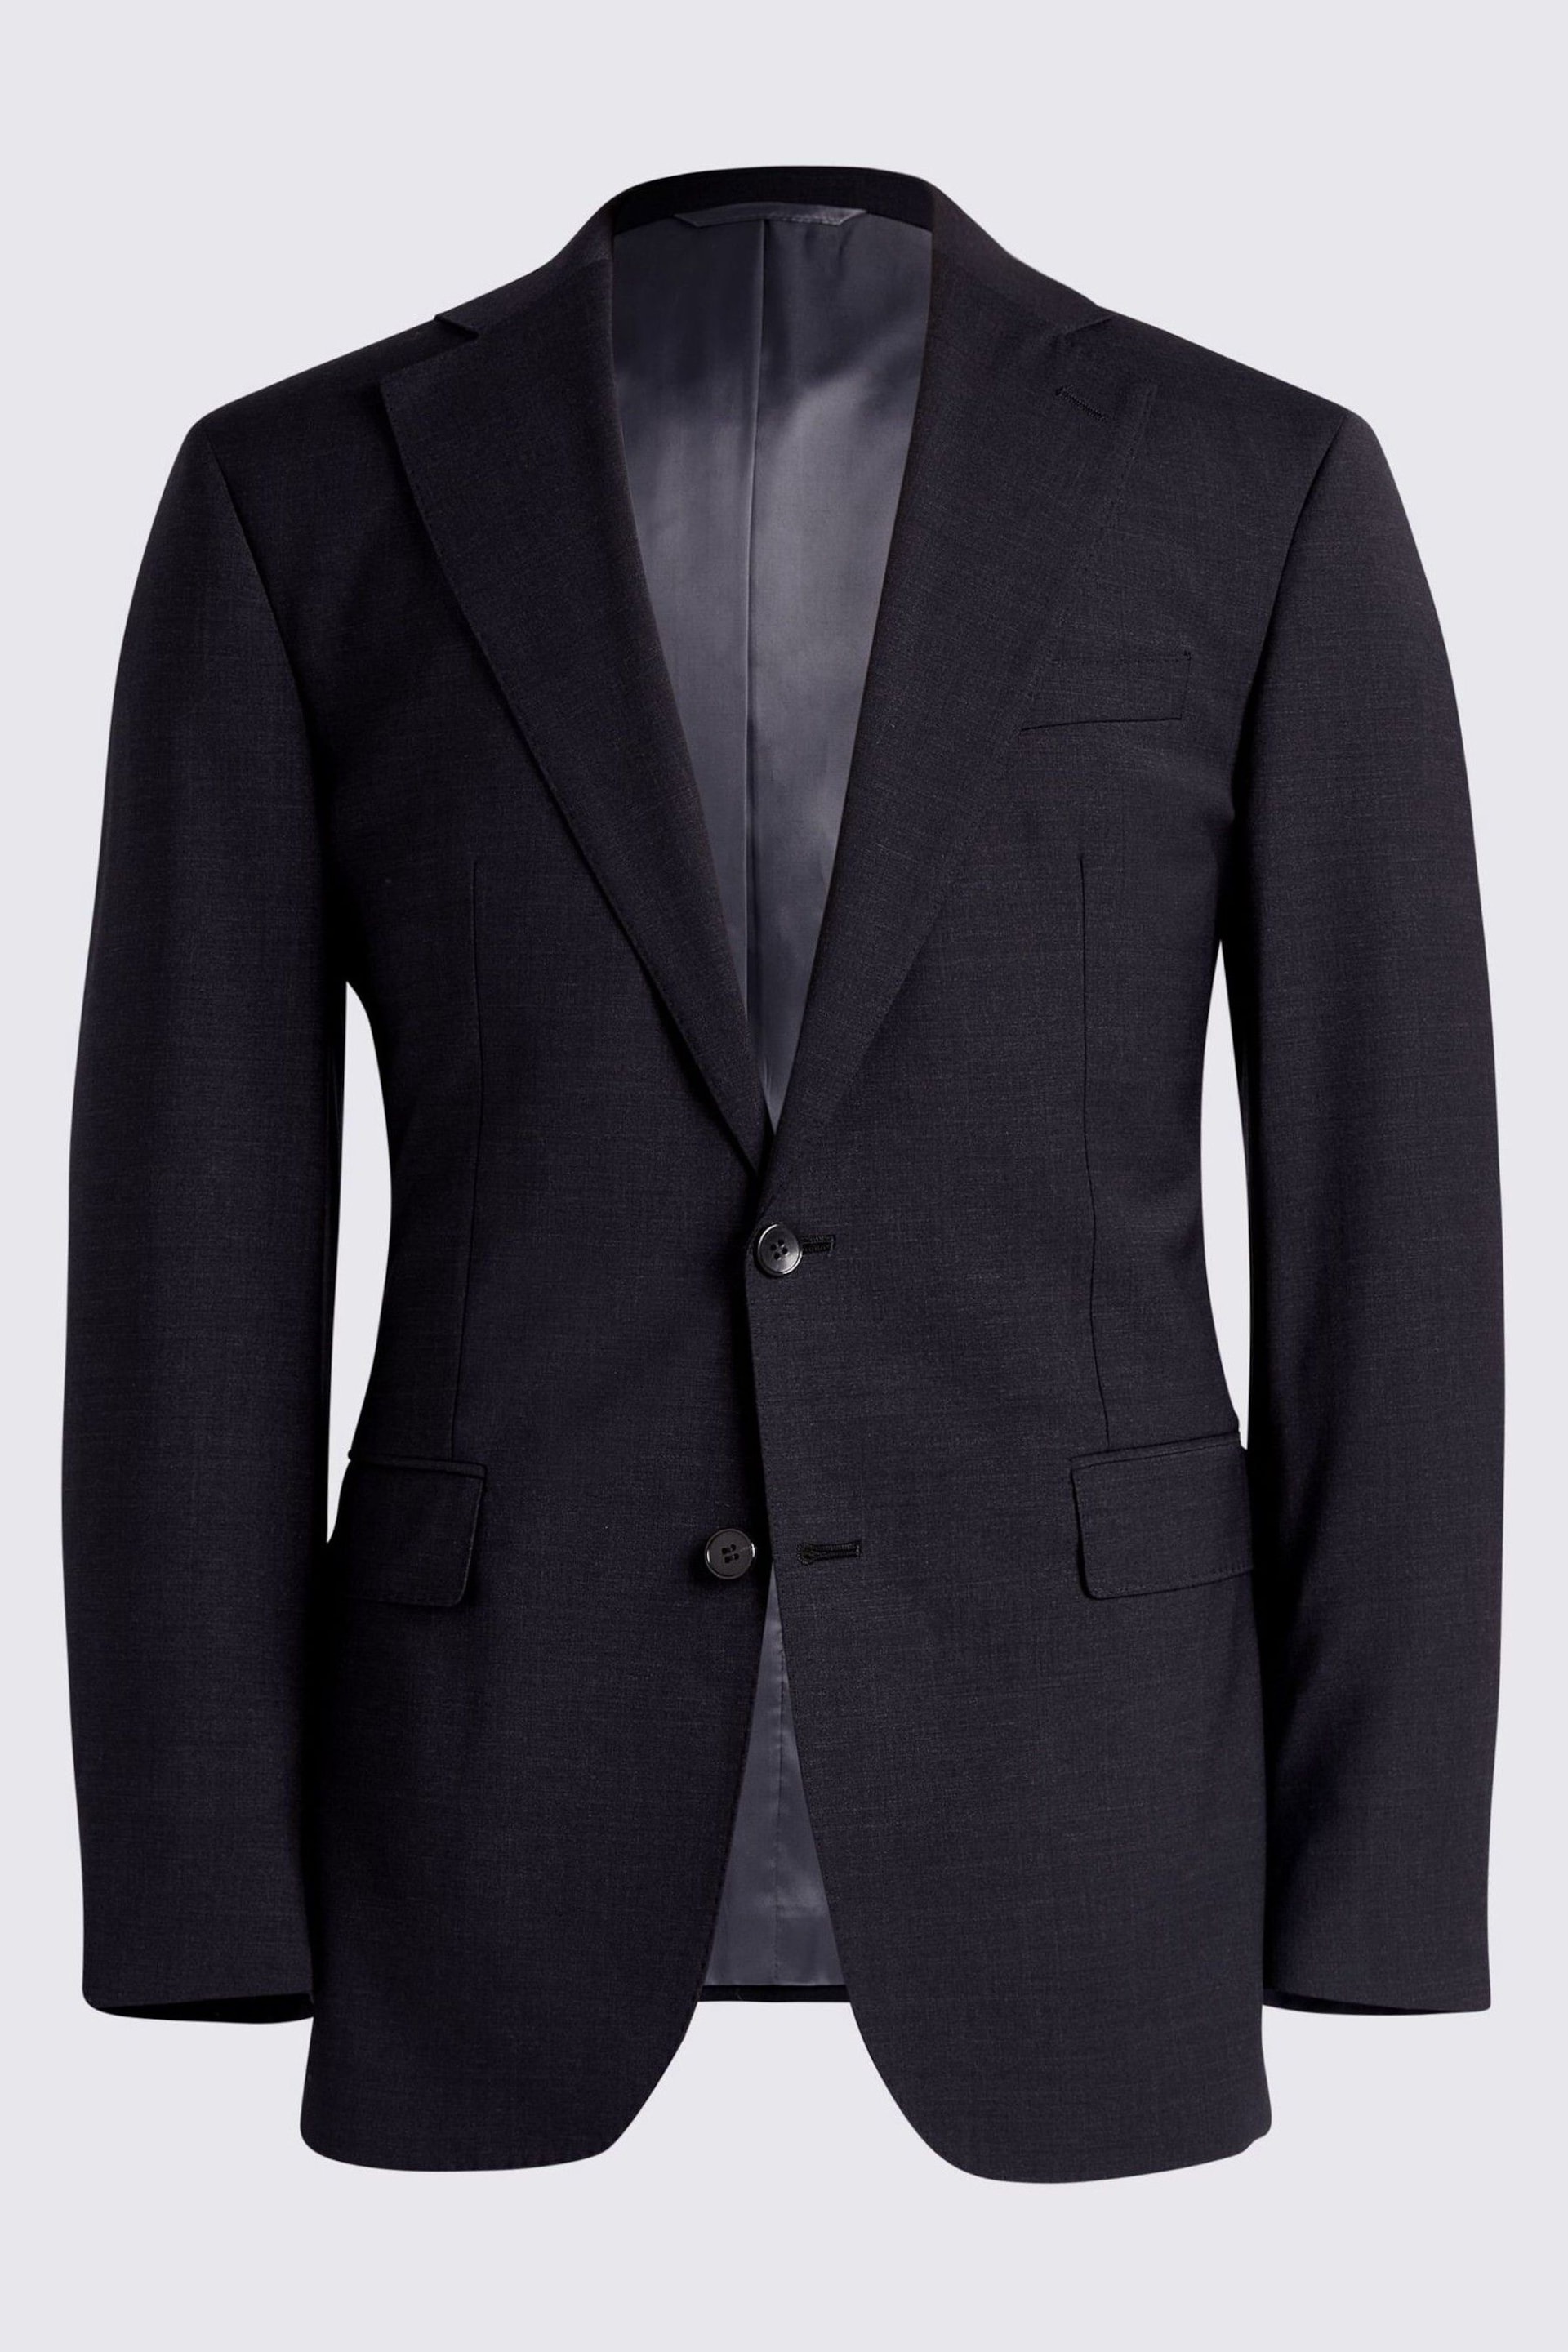 MOSS Charcoal Grey Tailored Fit Performance Suit Jacket - Image 7 of 7